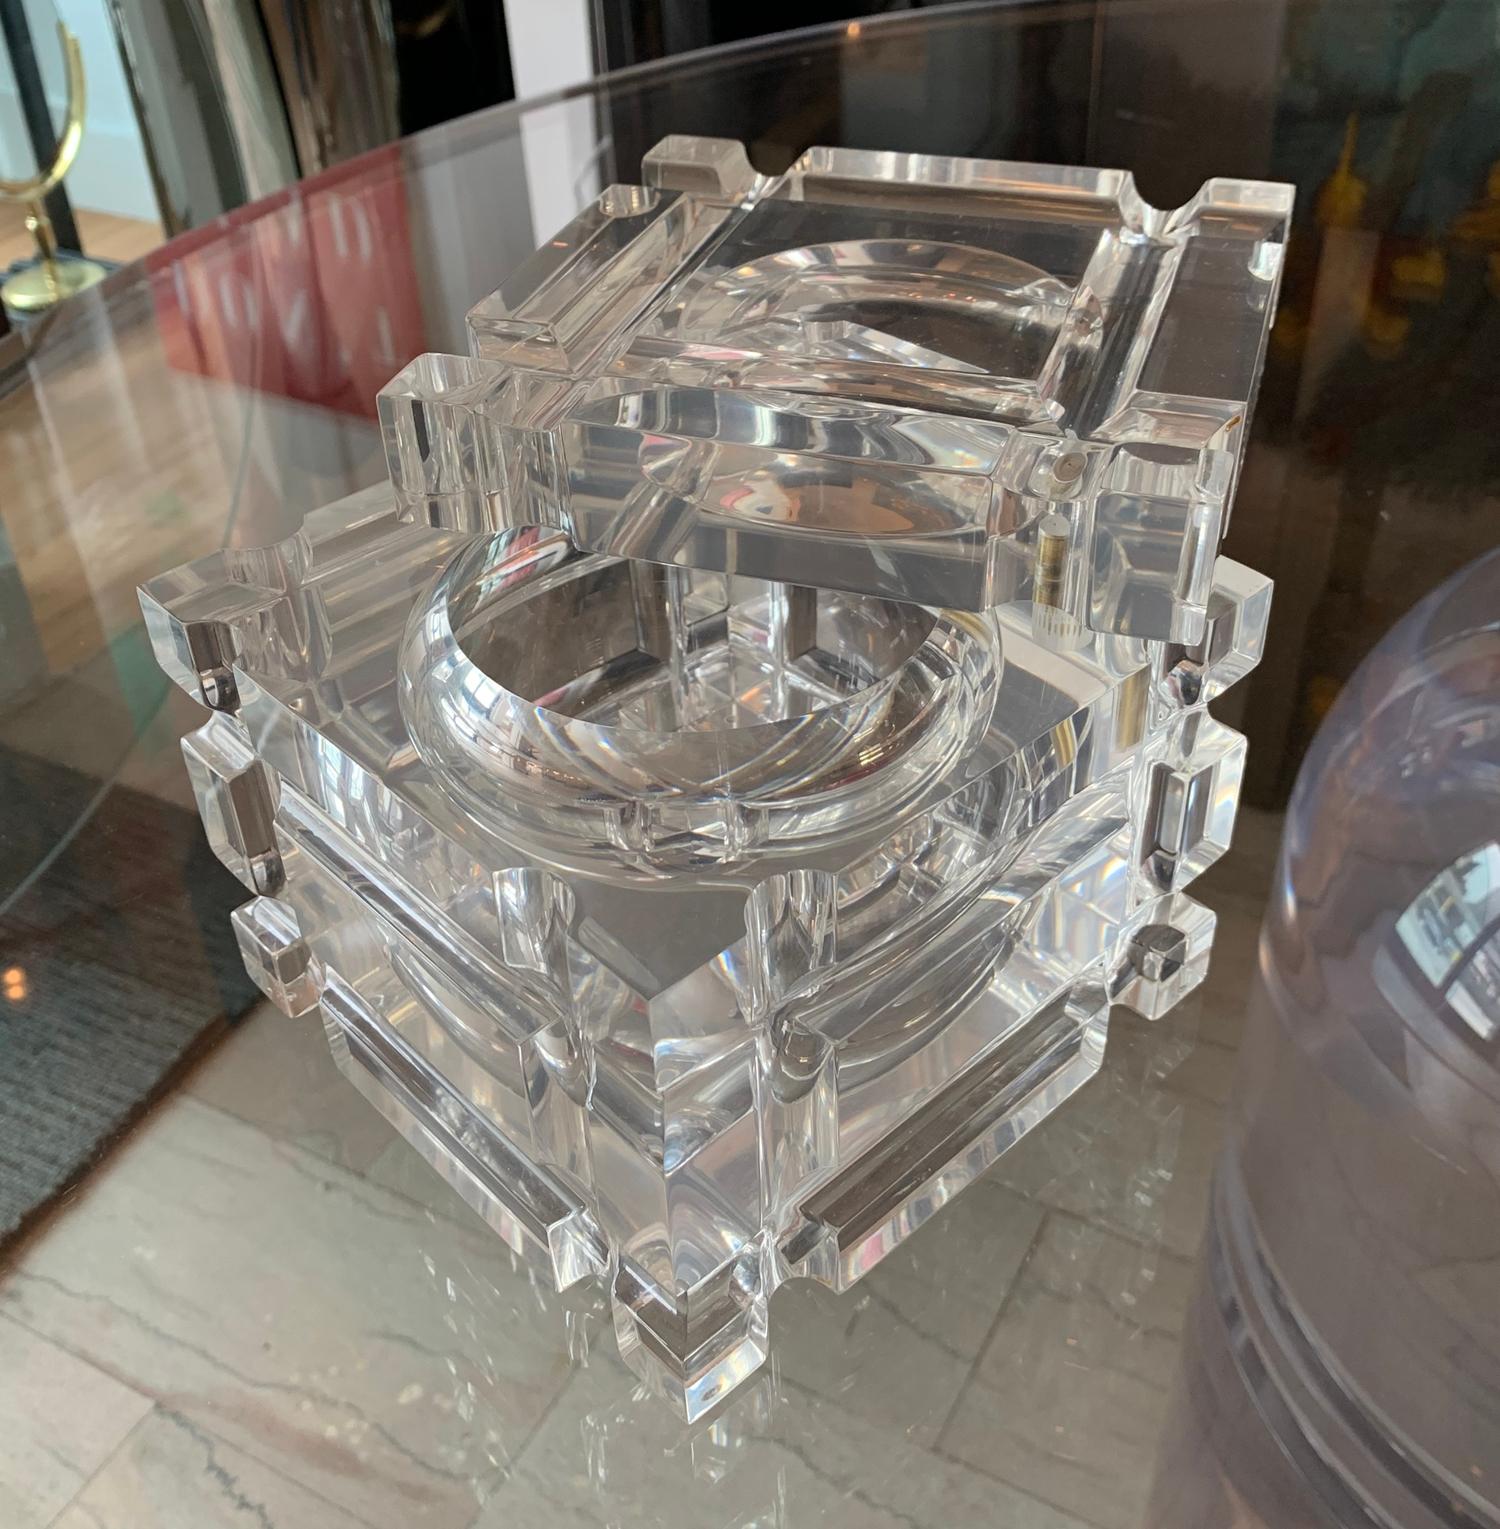 Stunning and beautiful ice bucket in Lucite executed in a geometric style having a swiveling lid.
The piece is in very good condition free of chips, nicks or cloudiness.
Measurements:
6.5